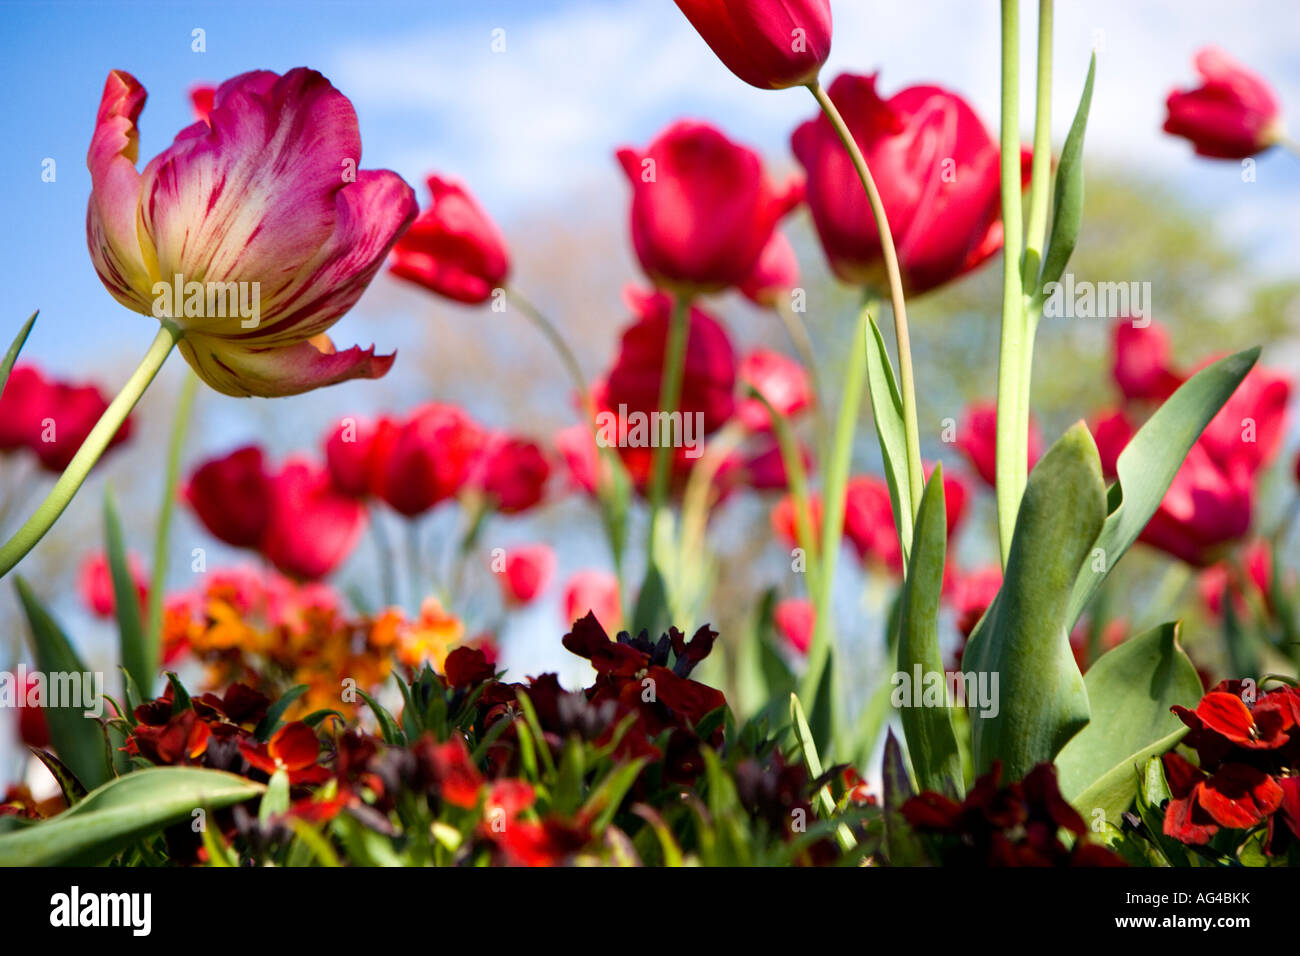 Worms eye view of red flowering Tulips in spring. UK Stock Photo